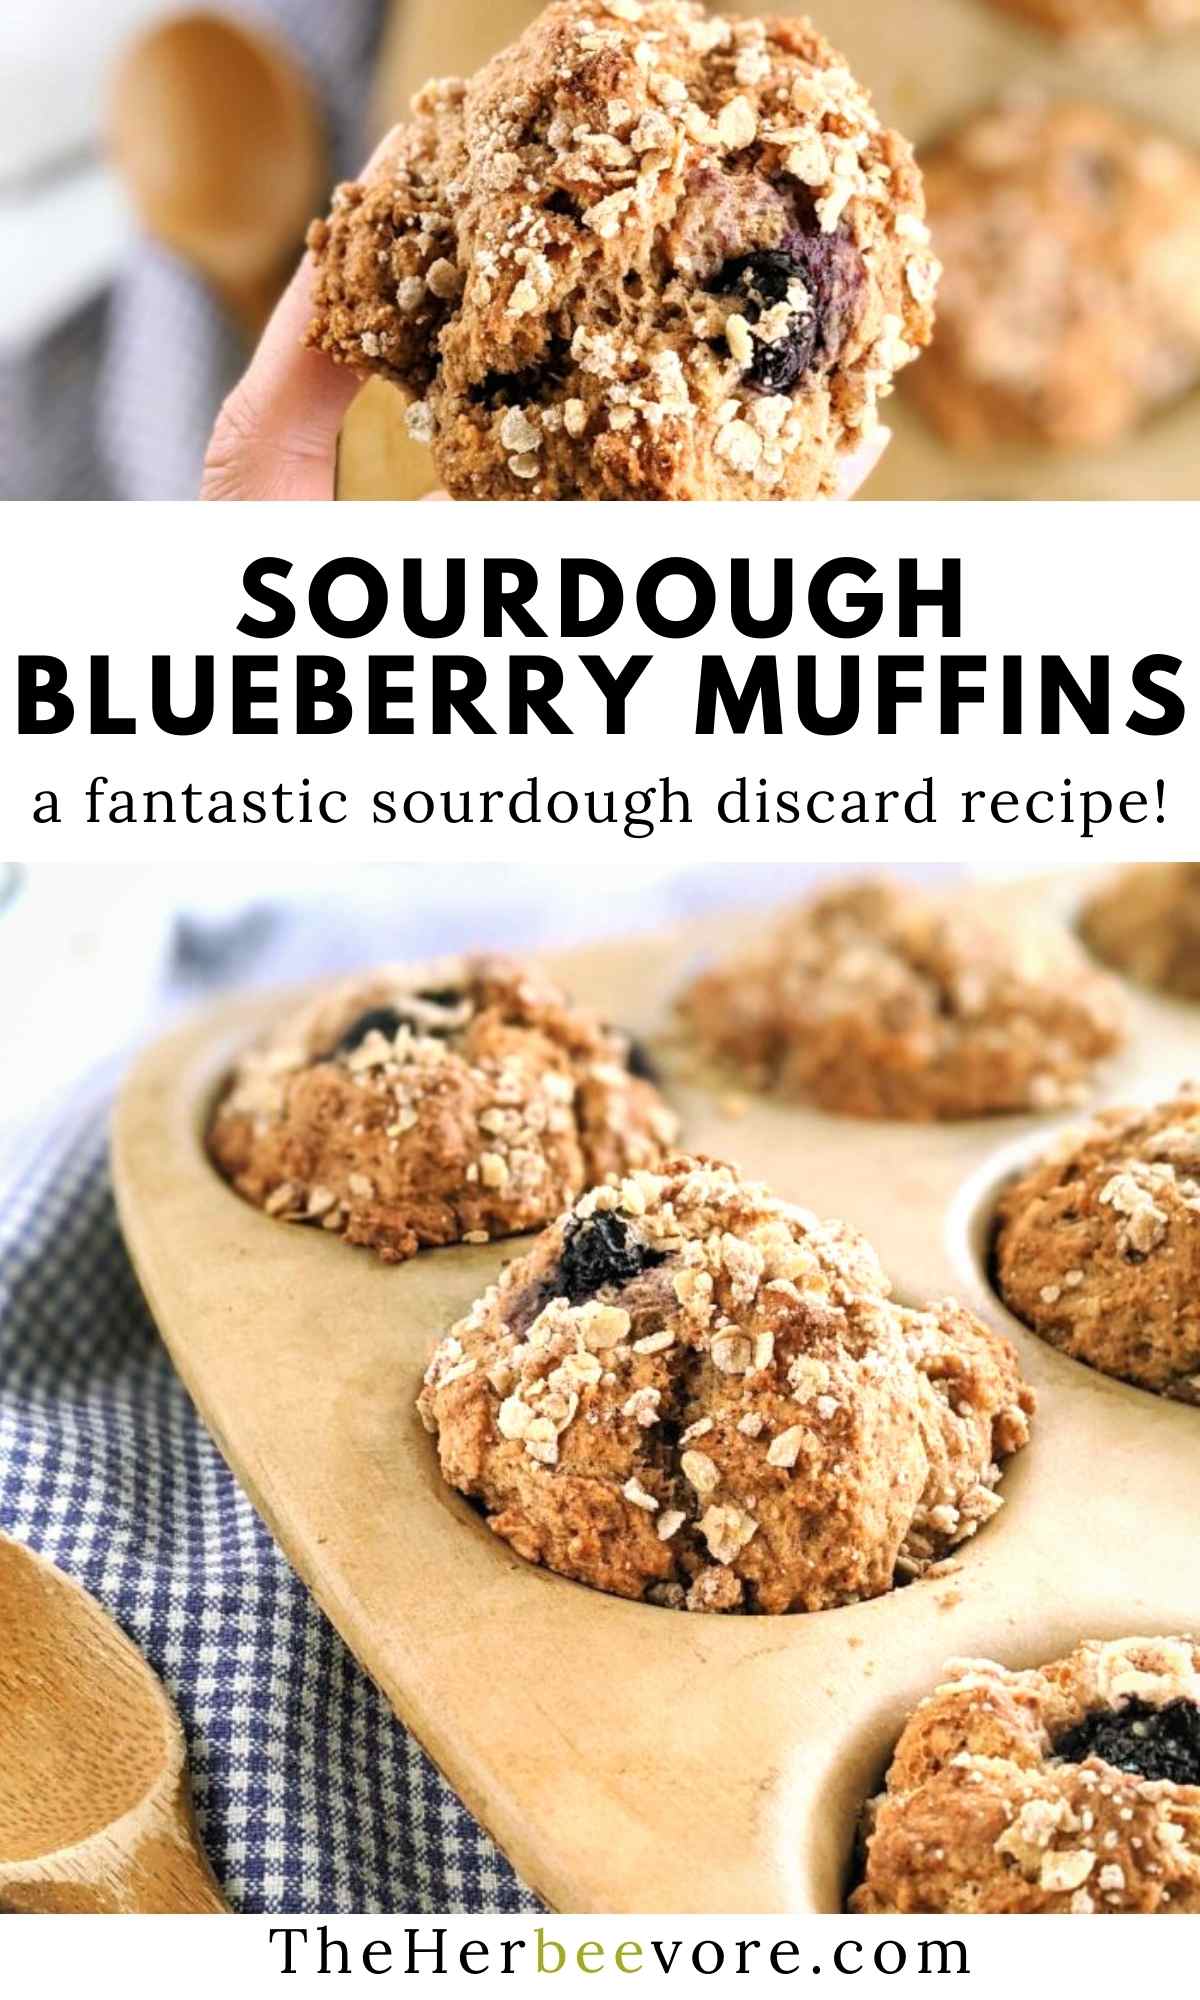 sourdough blueberry muffins recipe vegan vegetarian dairy free egg free healthy breakfast ideas to meal prep make ahead with sourdough discard